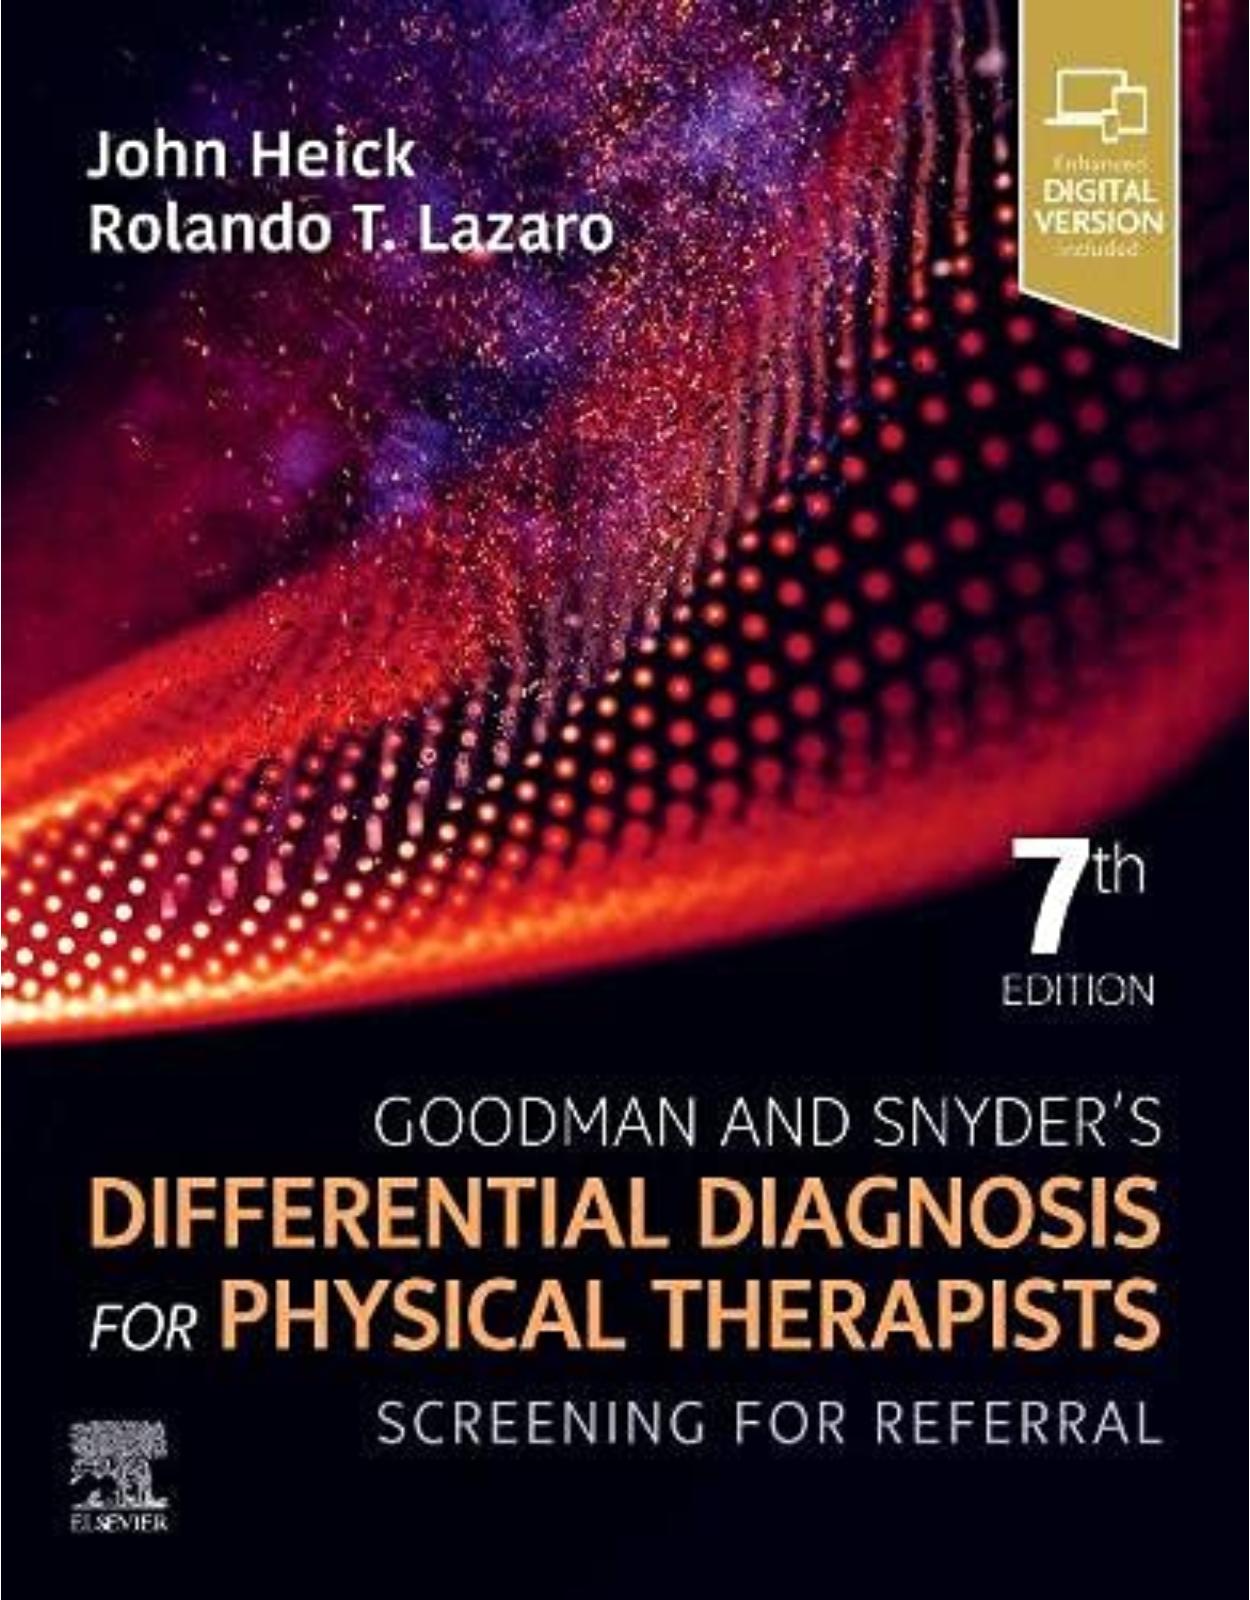 Goodman and Snyders Differential Diagnosis for Physical Therapists